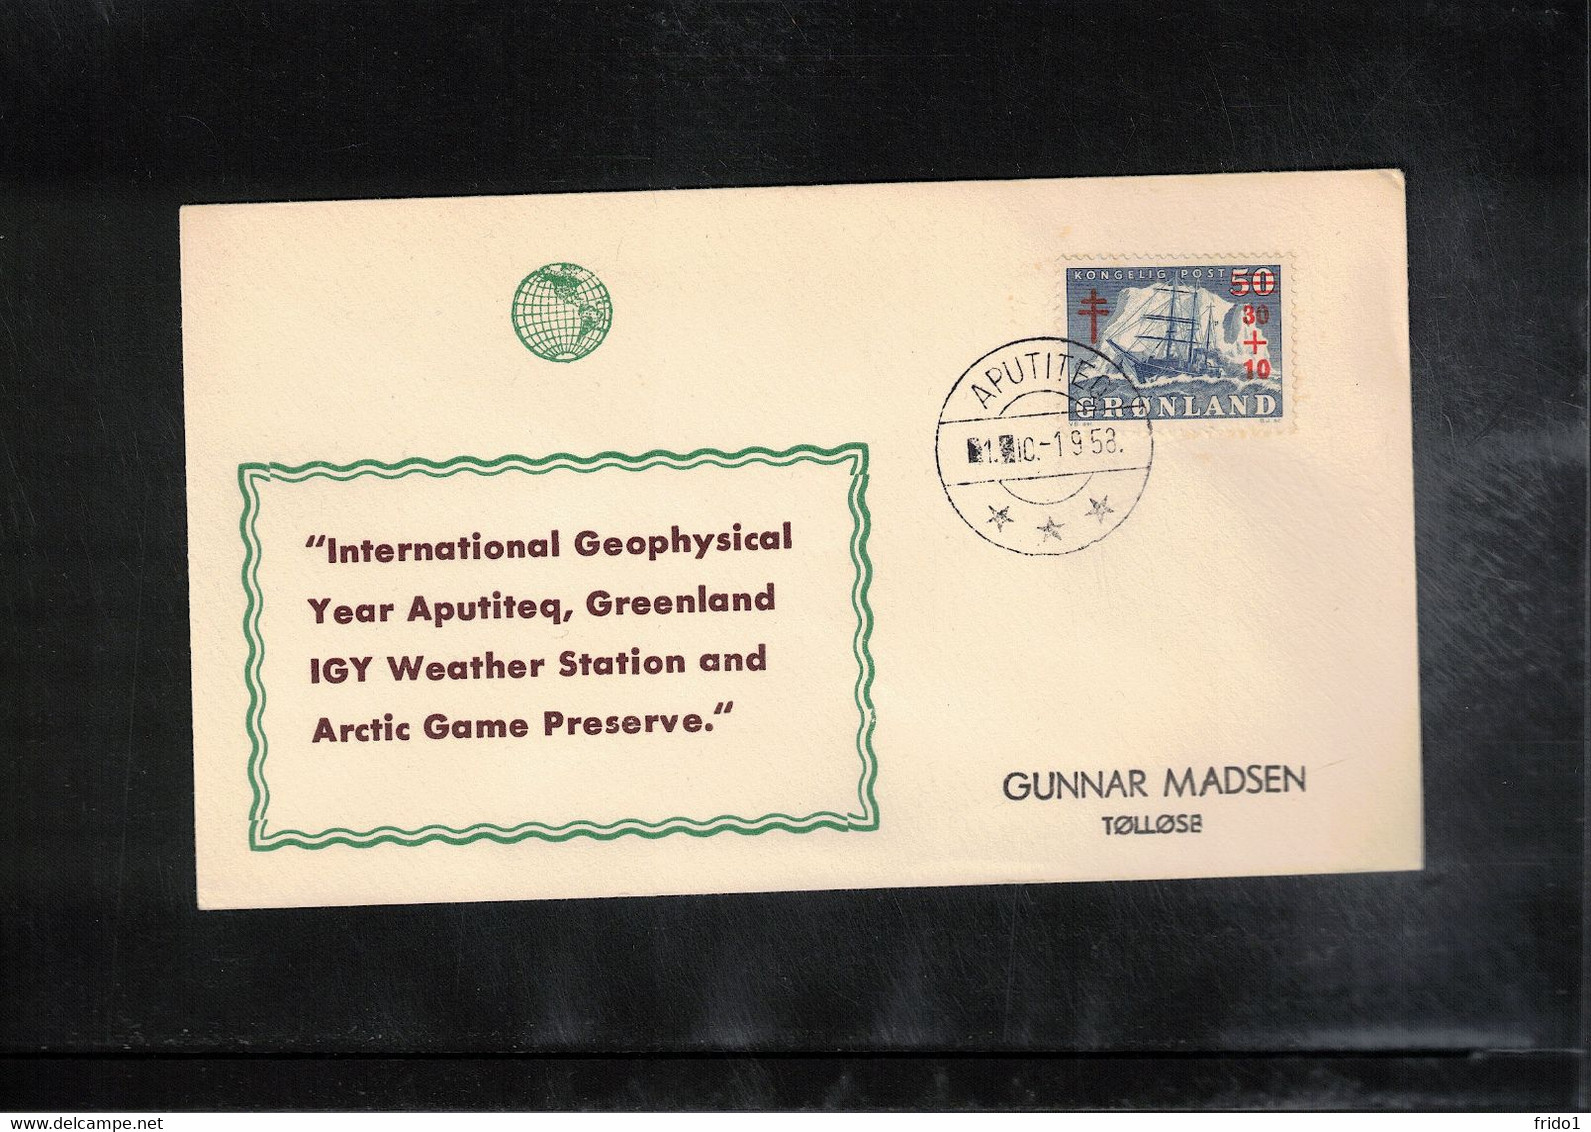 Greenland / Groenland 1958 International Geophysical Year IGY Weather Station APUTITEQ - Covers & Documents